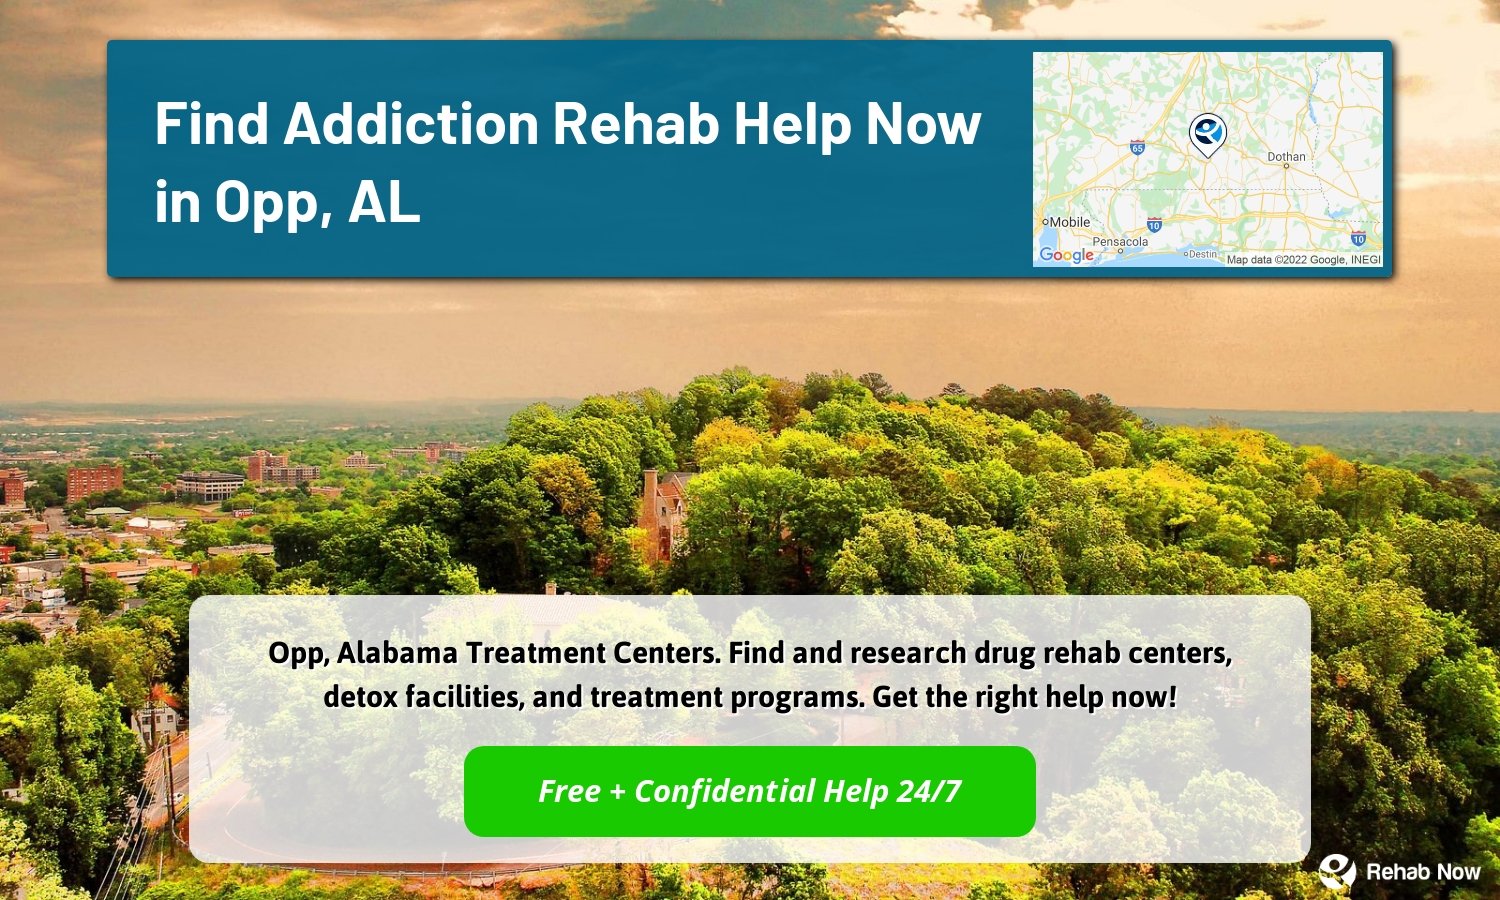 Opp, Alabama Treatment Centers. Find and research drug rehab centers, detox facilities, and treatment programs. Get the right help now!